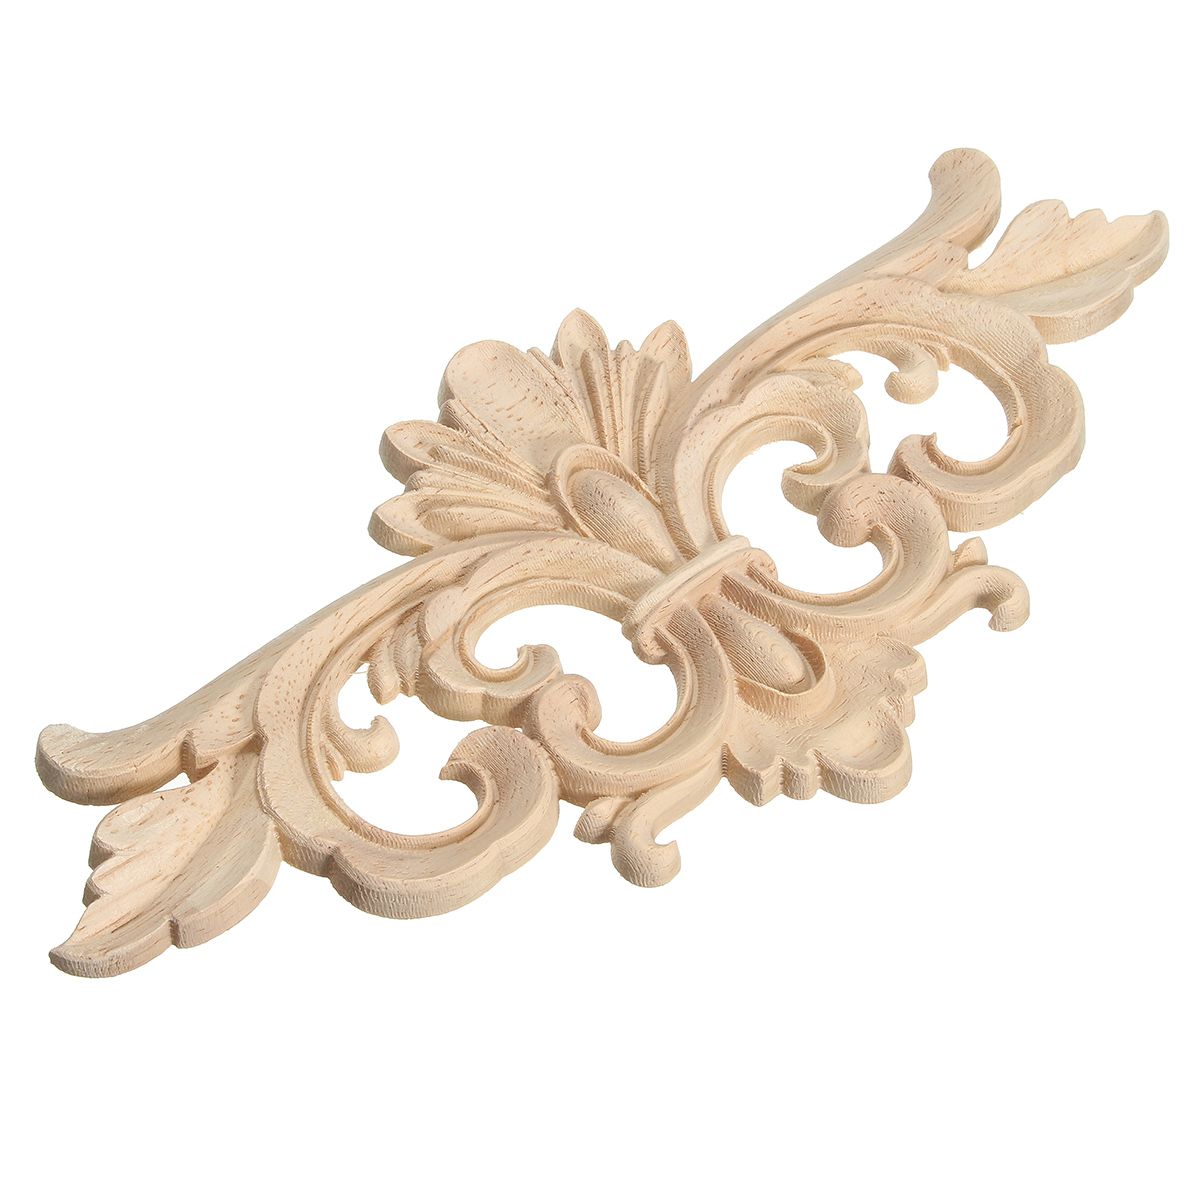 Wood-Carving-Applique-Unpainted-Flower-Applique-Wood-Carving-Decal-for-Furniture-Cabinet-22x10cm-1162699